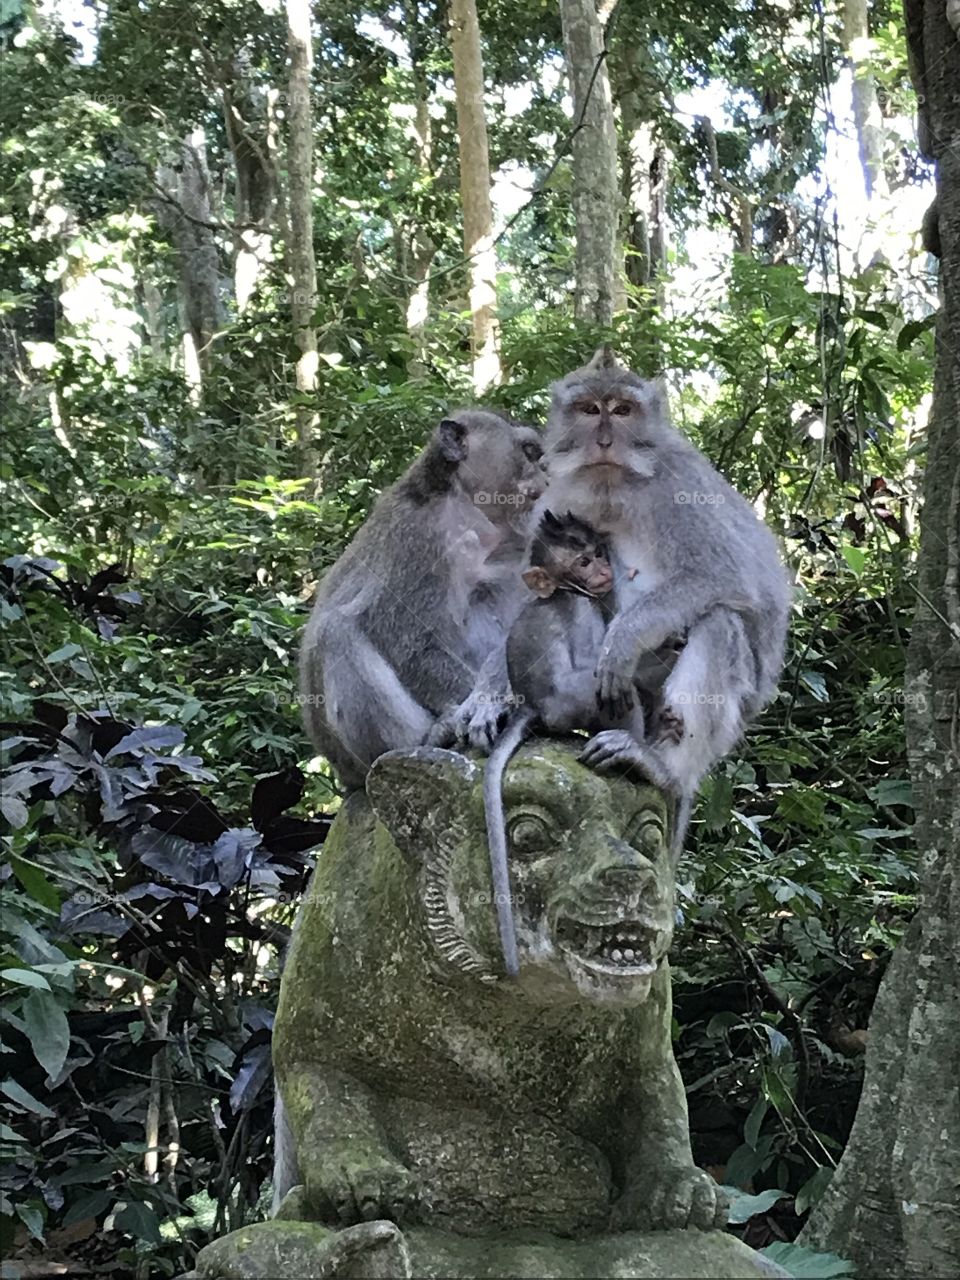 The power of family!This photo was taken in Bali, Indonesia,in the monkey forest. No matter if you are animal or man, the family comes first.The little one feeling safe while hugging the papa whilst the mother stays near them.Home is where family is.